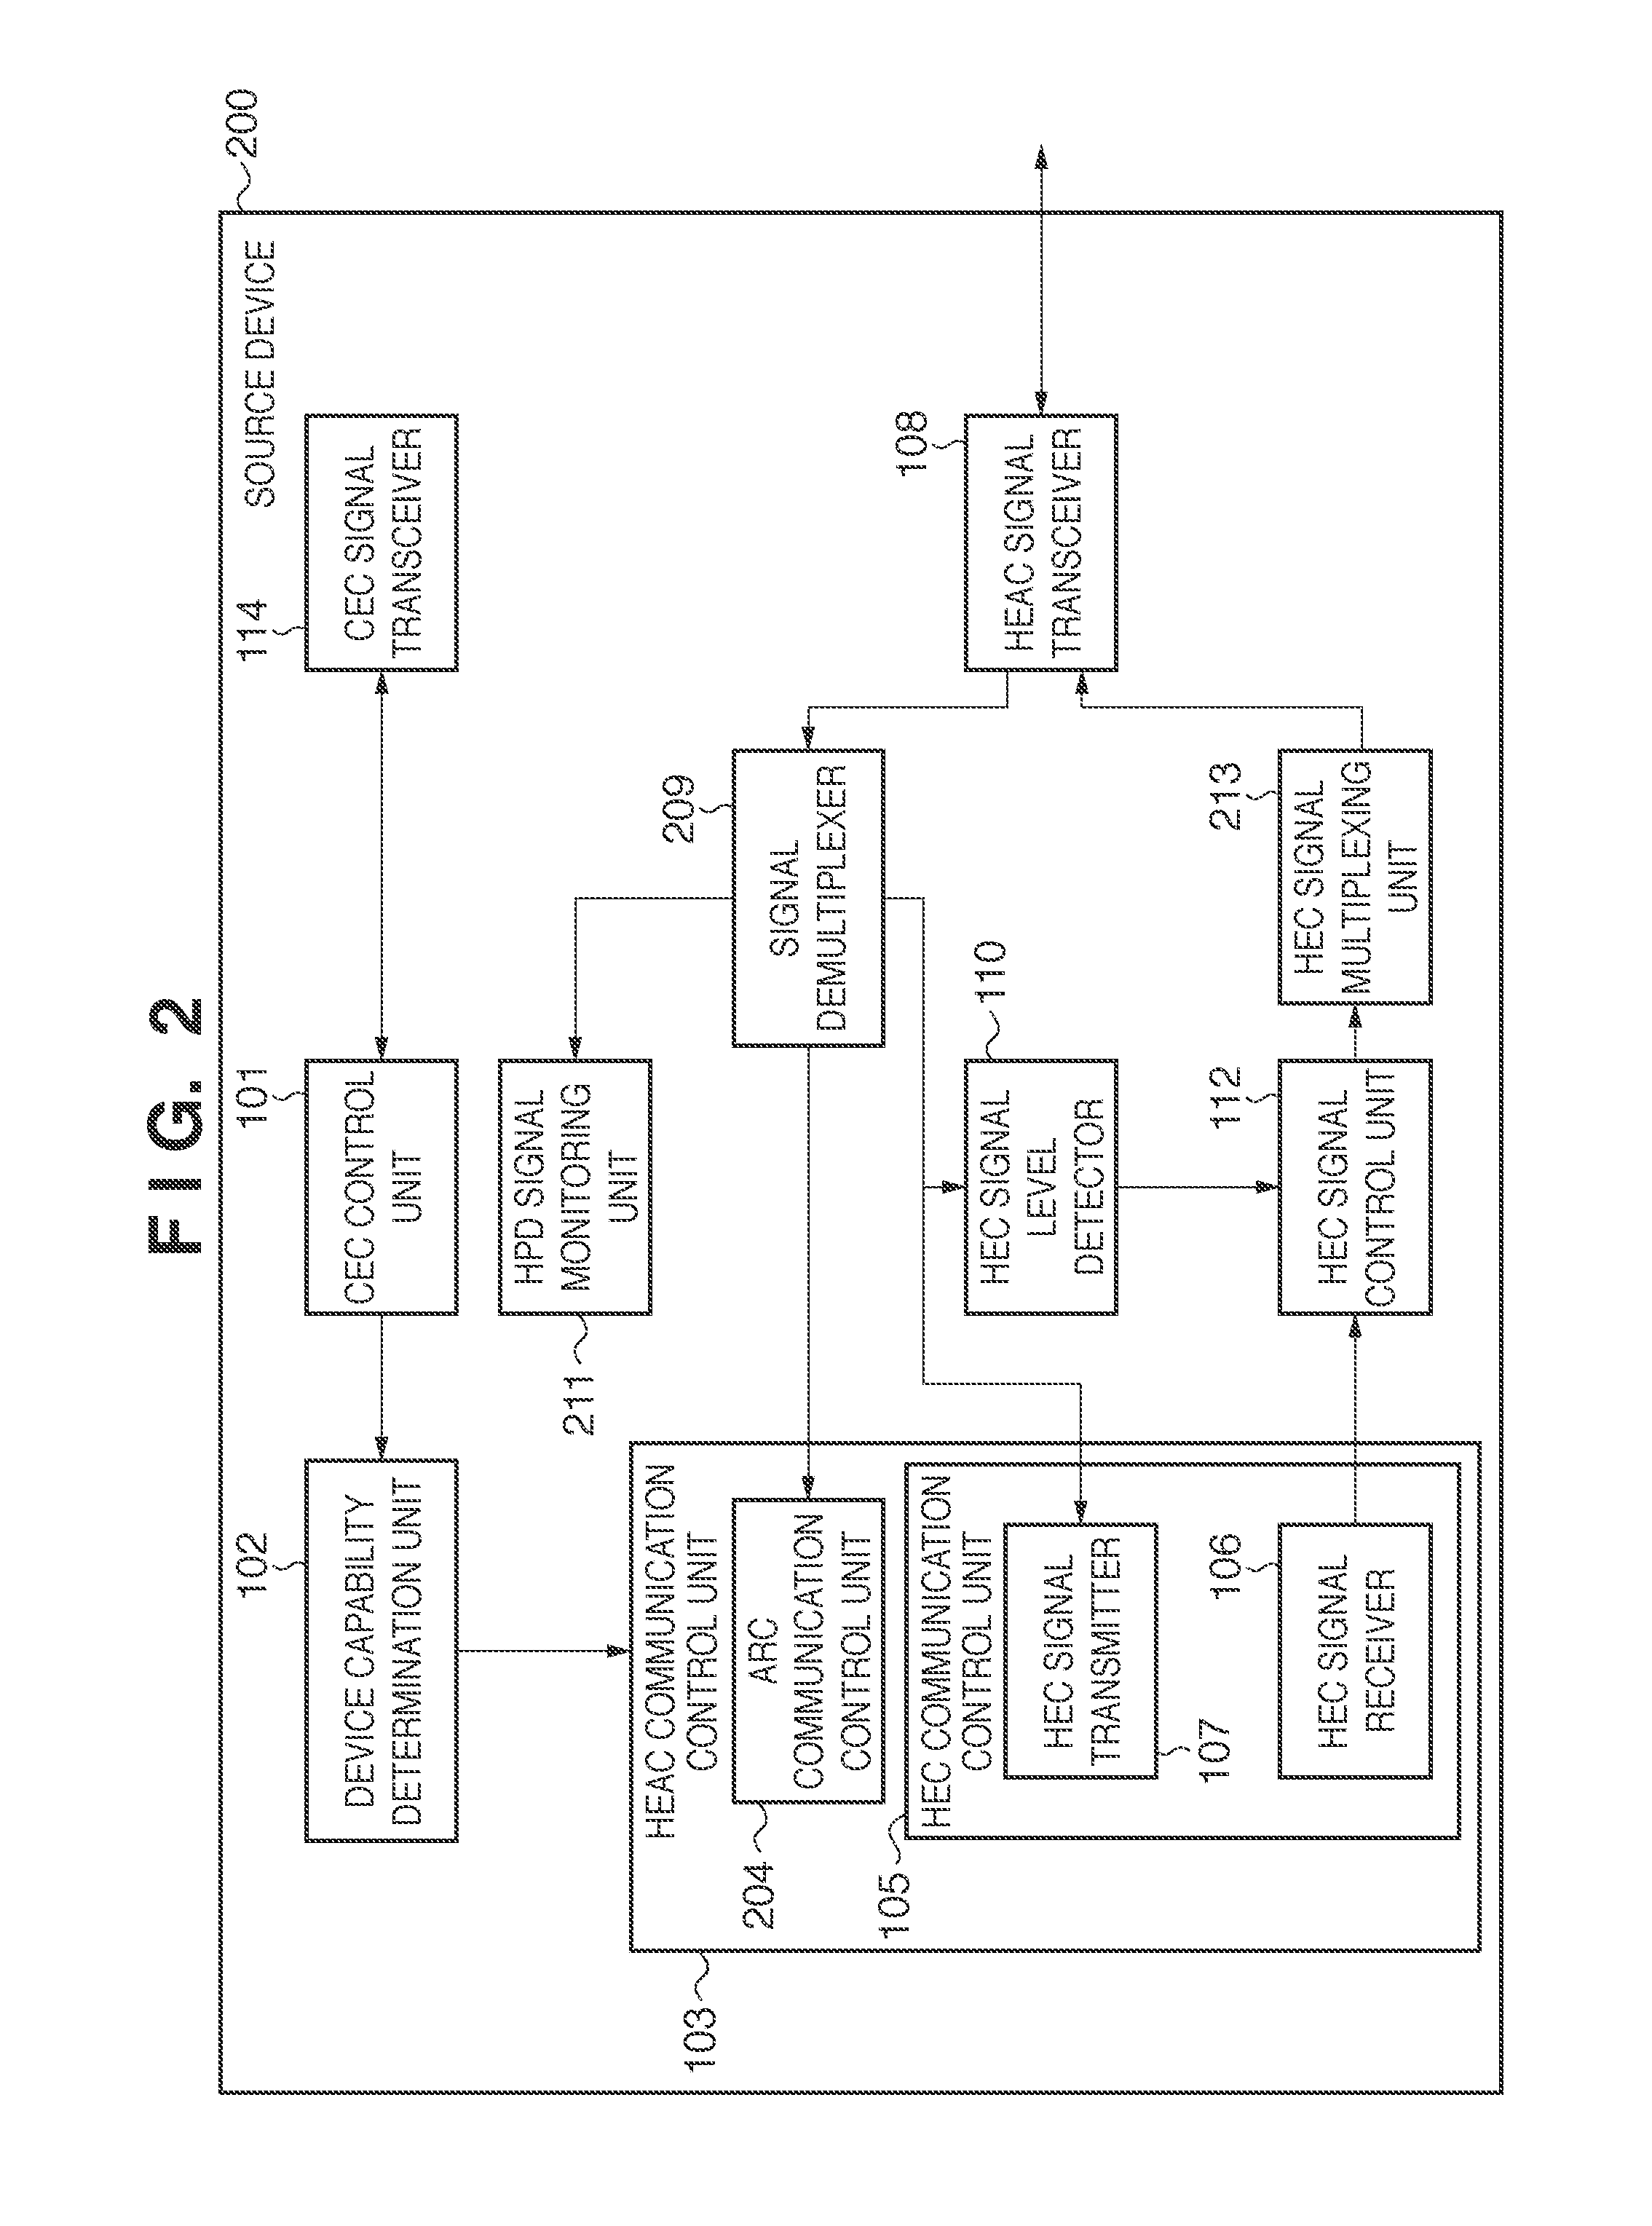 Communication apparatus and method of controlling same